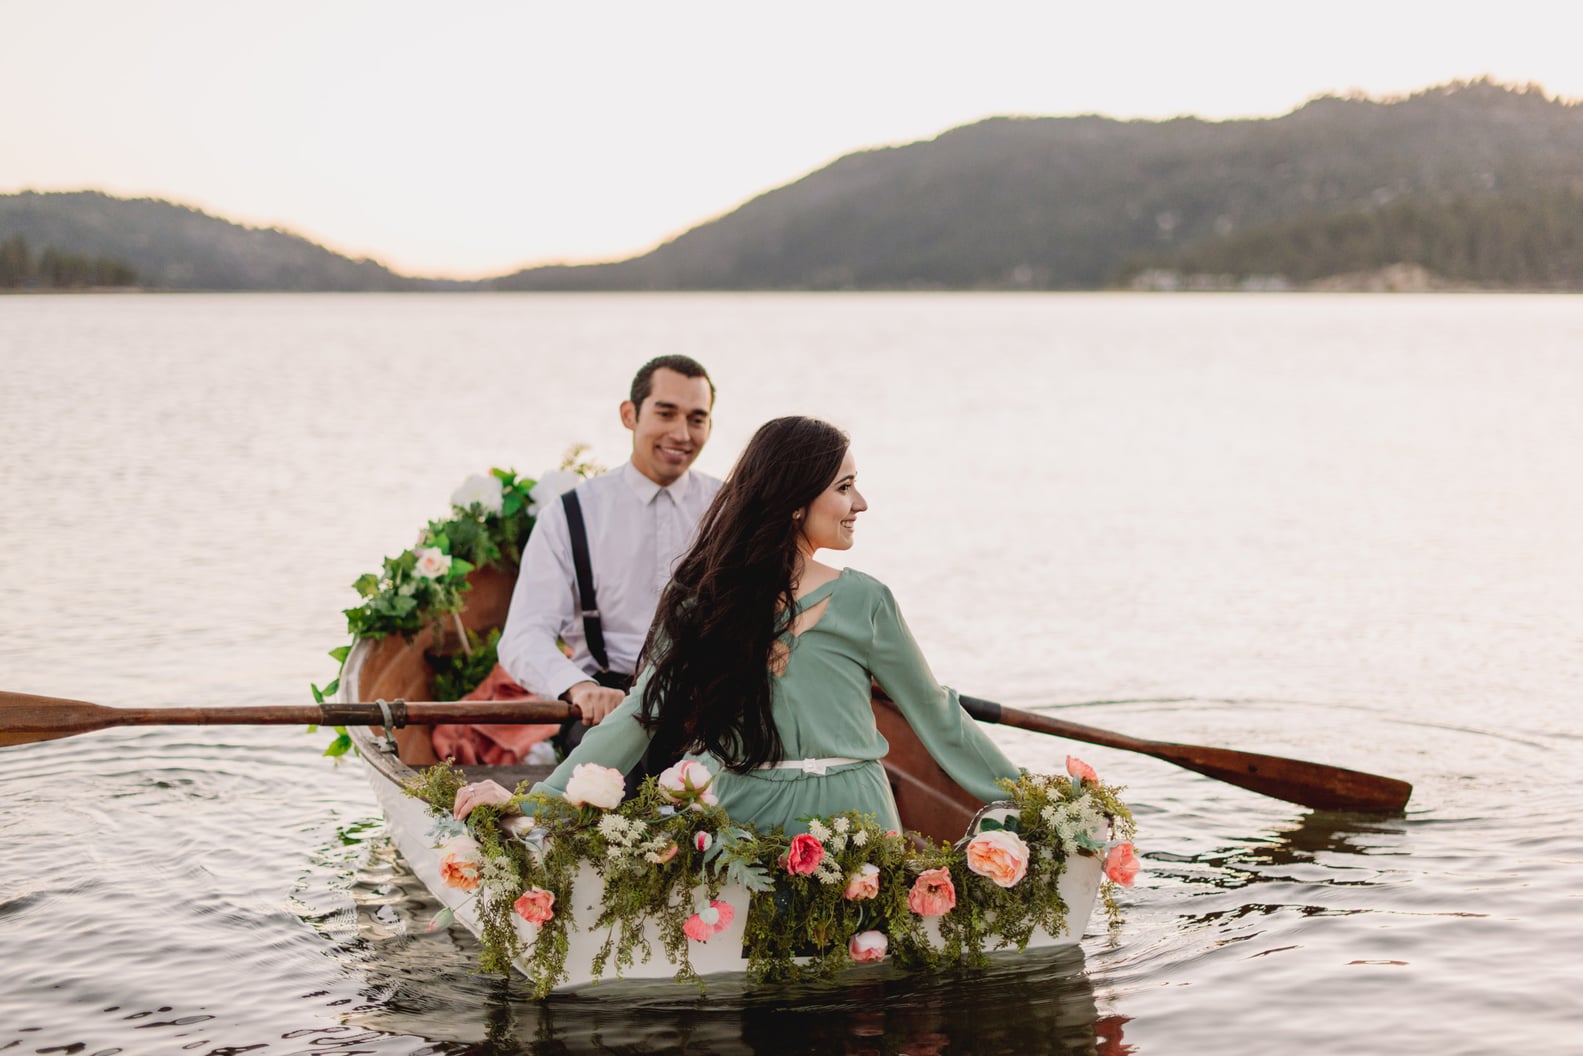 Engagement Photos In A Rowboat Popsugar Love And Sex 